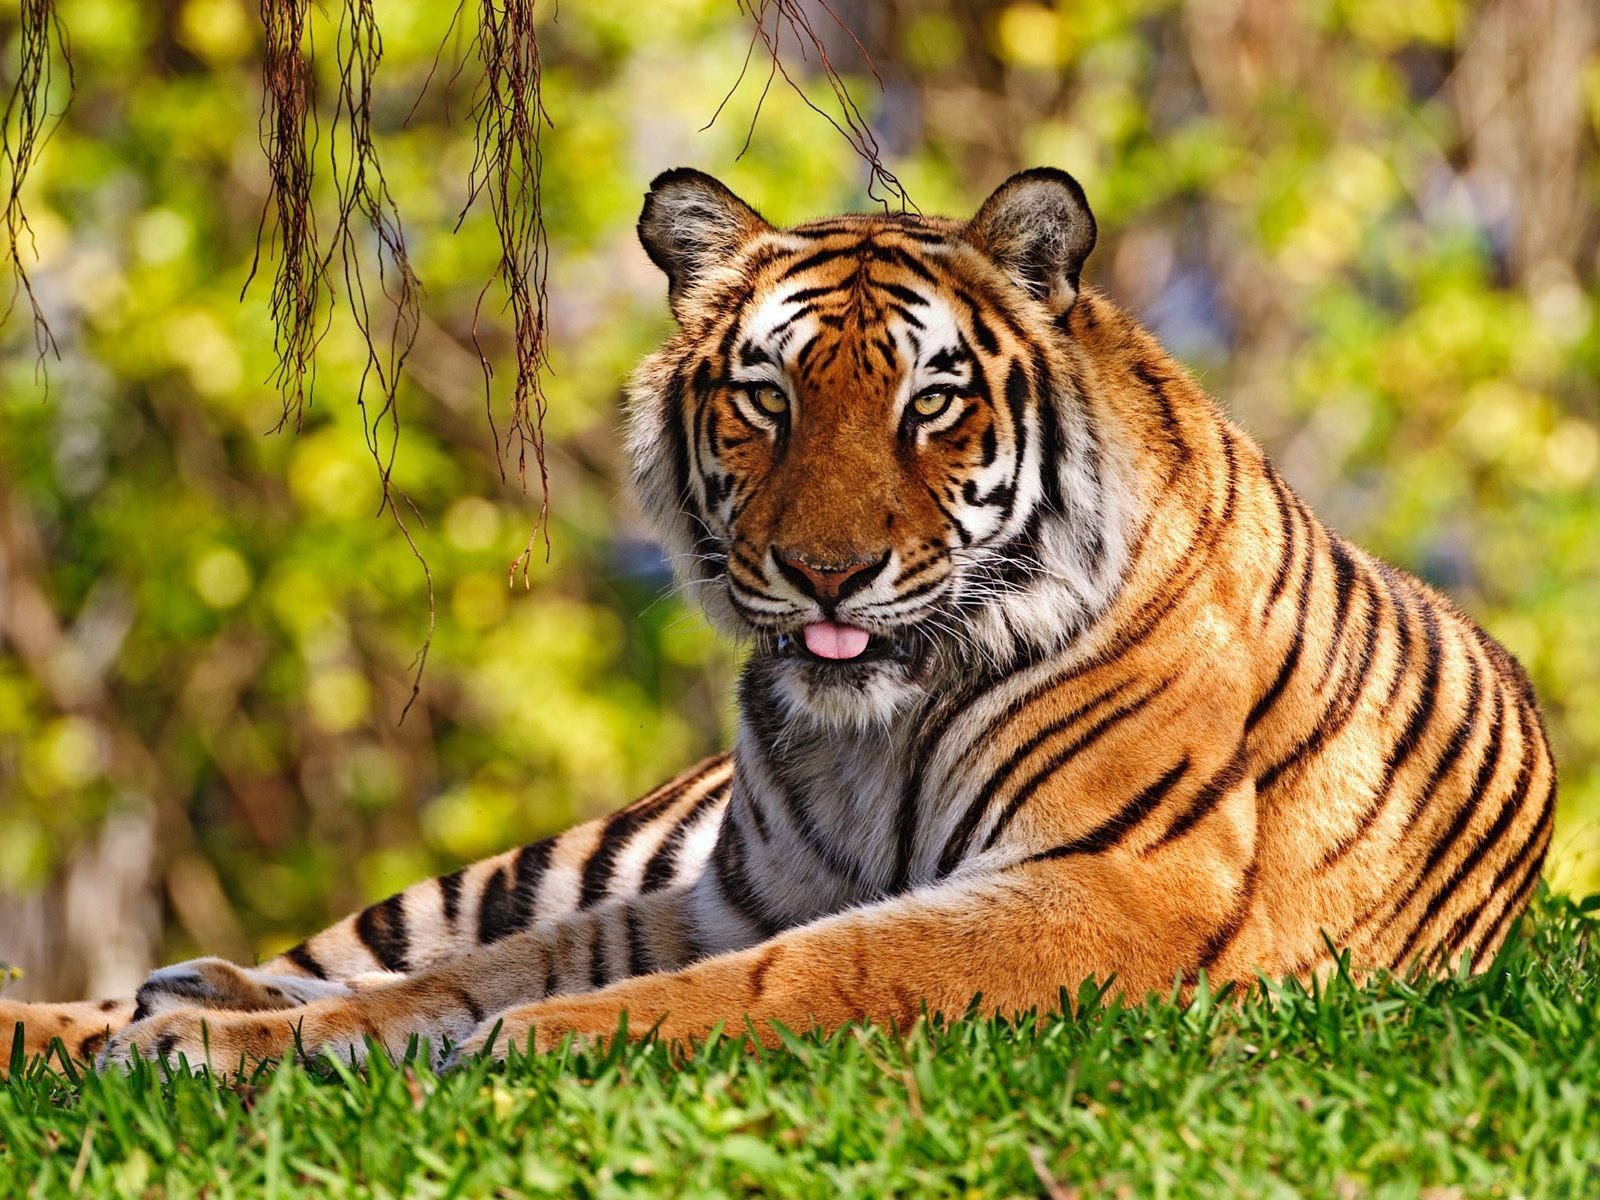 Get the best size of Tiger Wallpaper and Desktop tiger wallpapers here